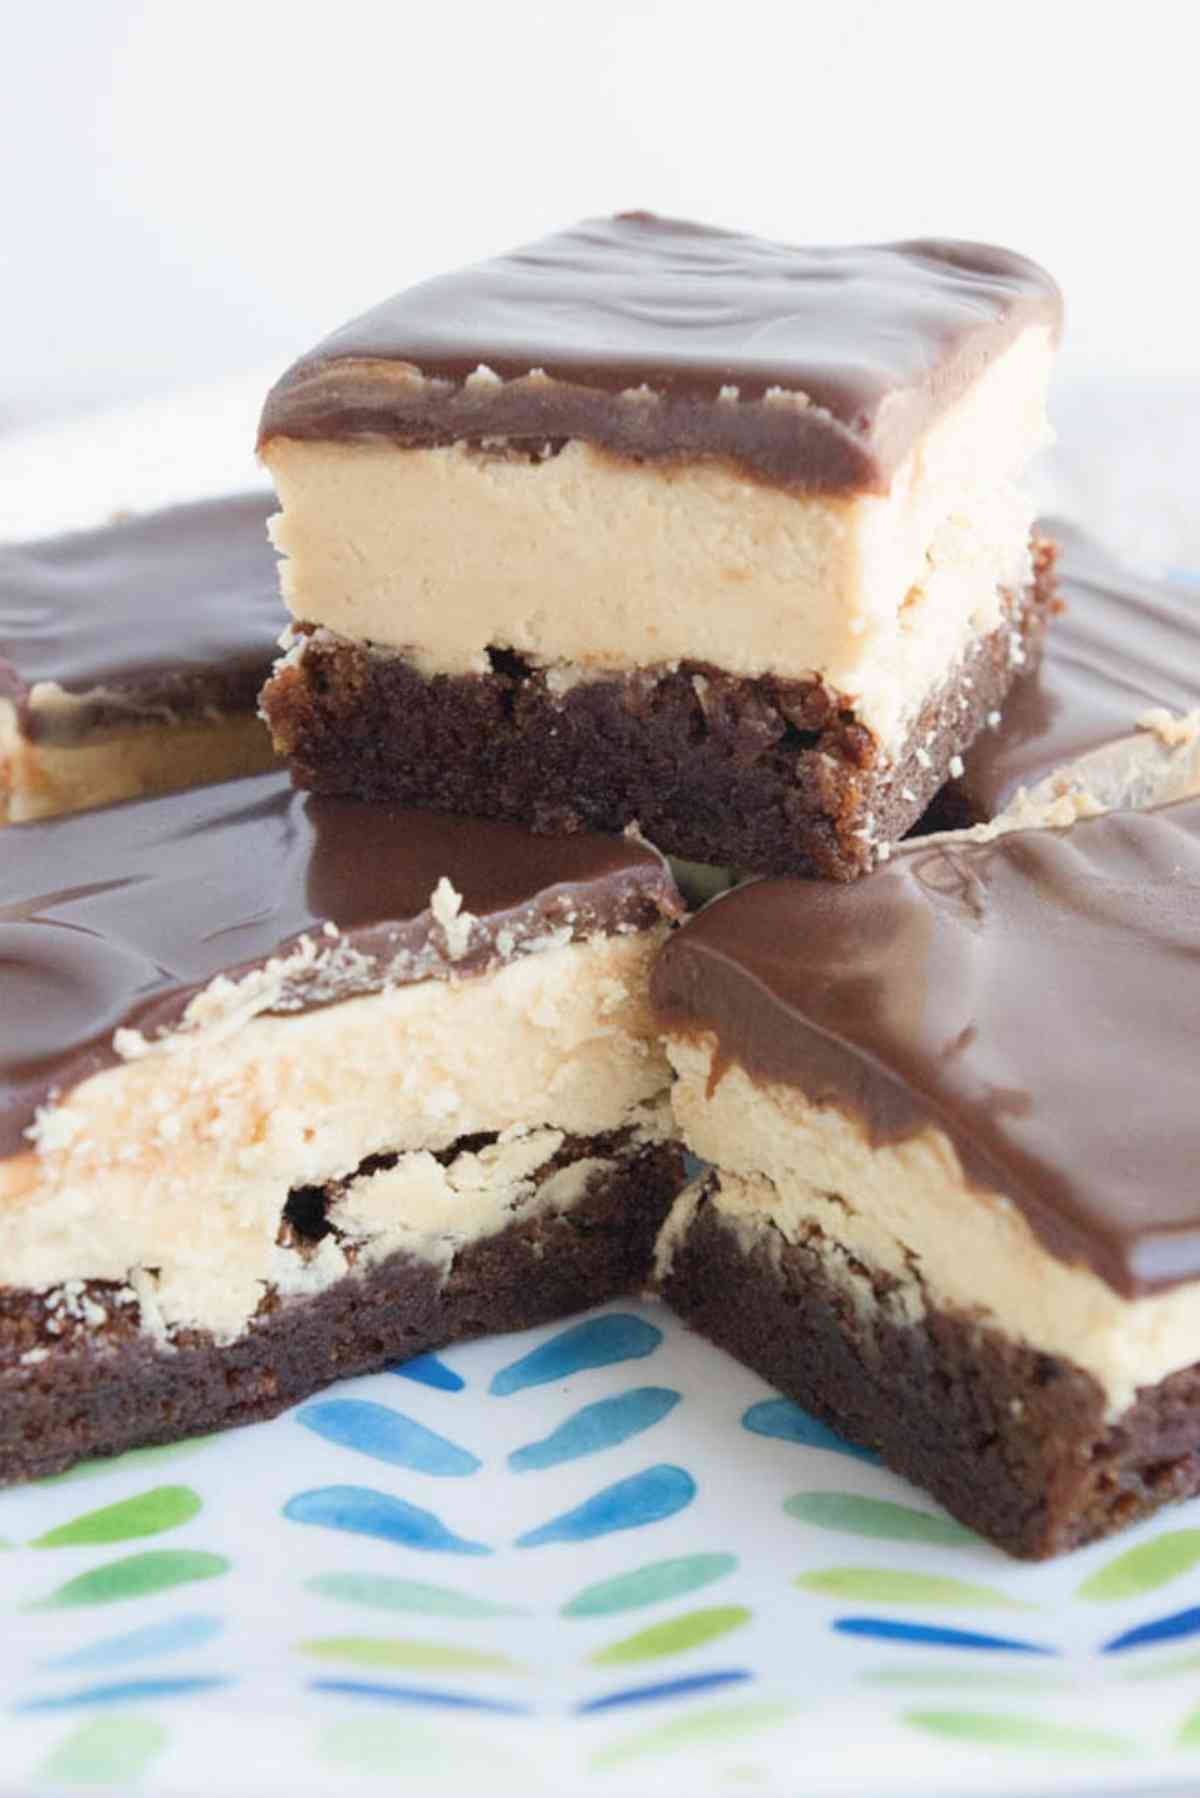 Chocolate Peanut Butter Brownies with Chocolate Ganache